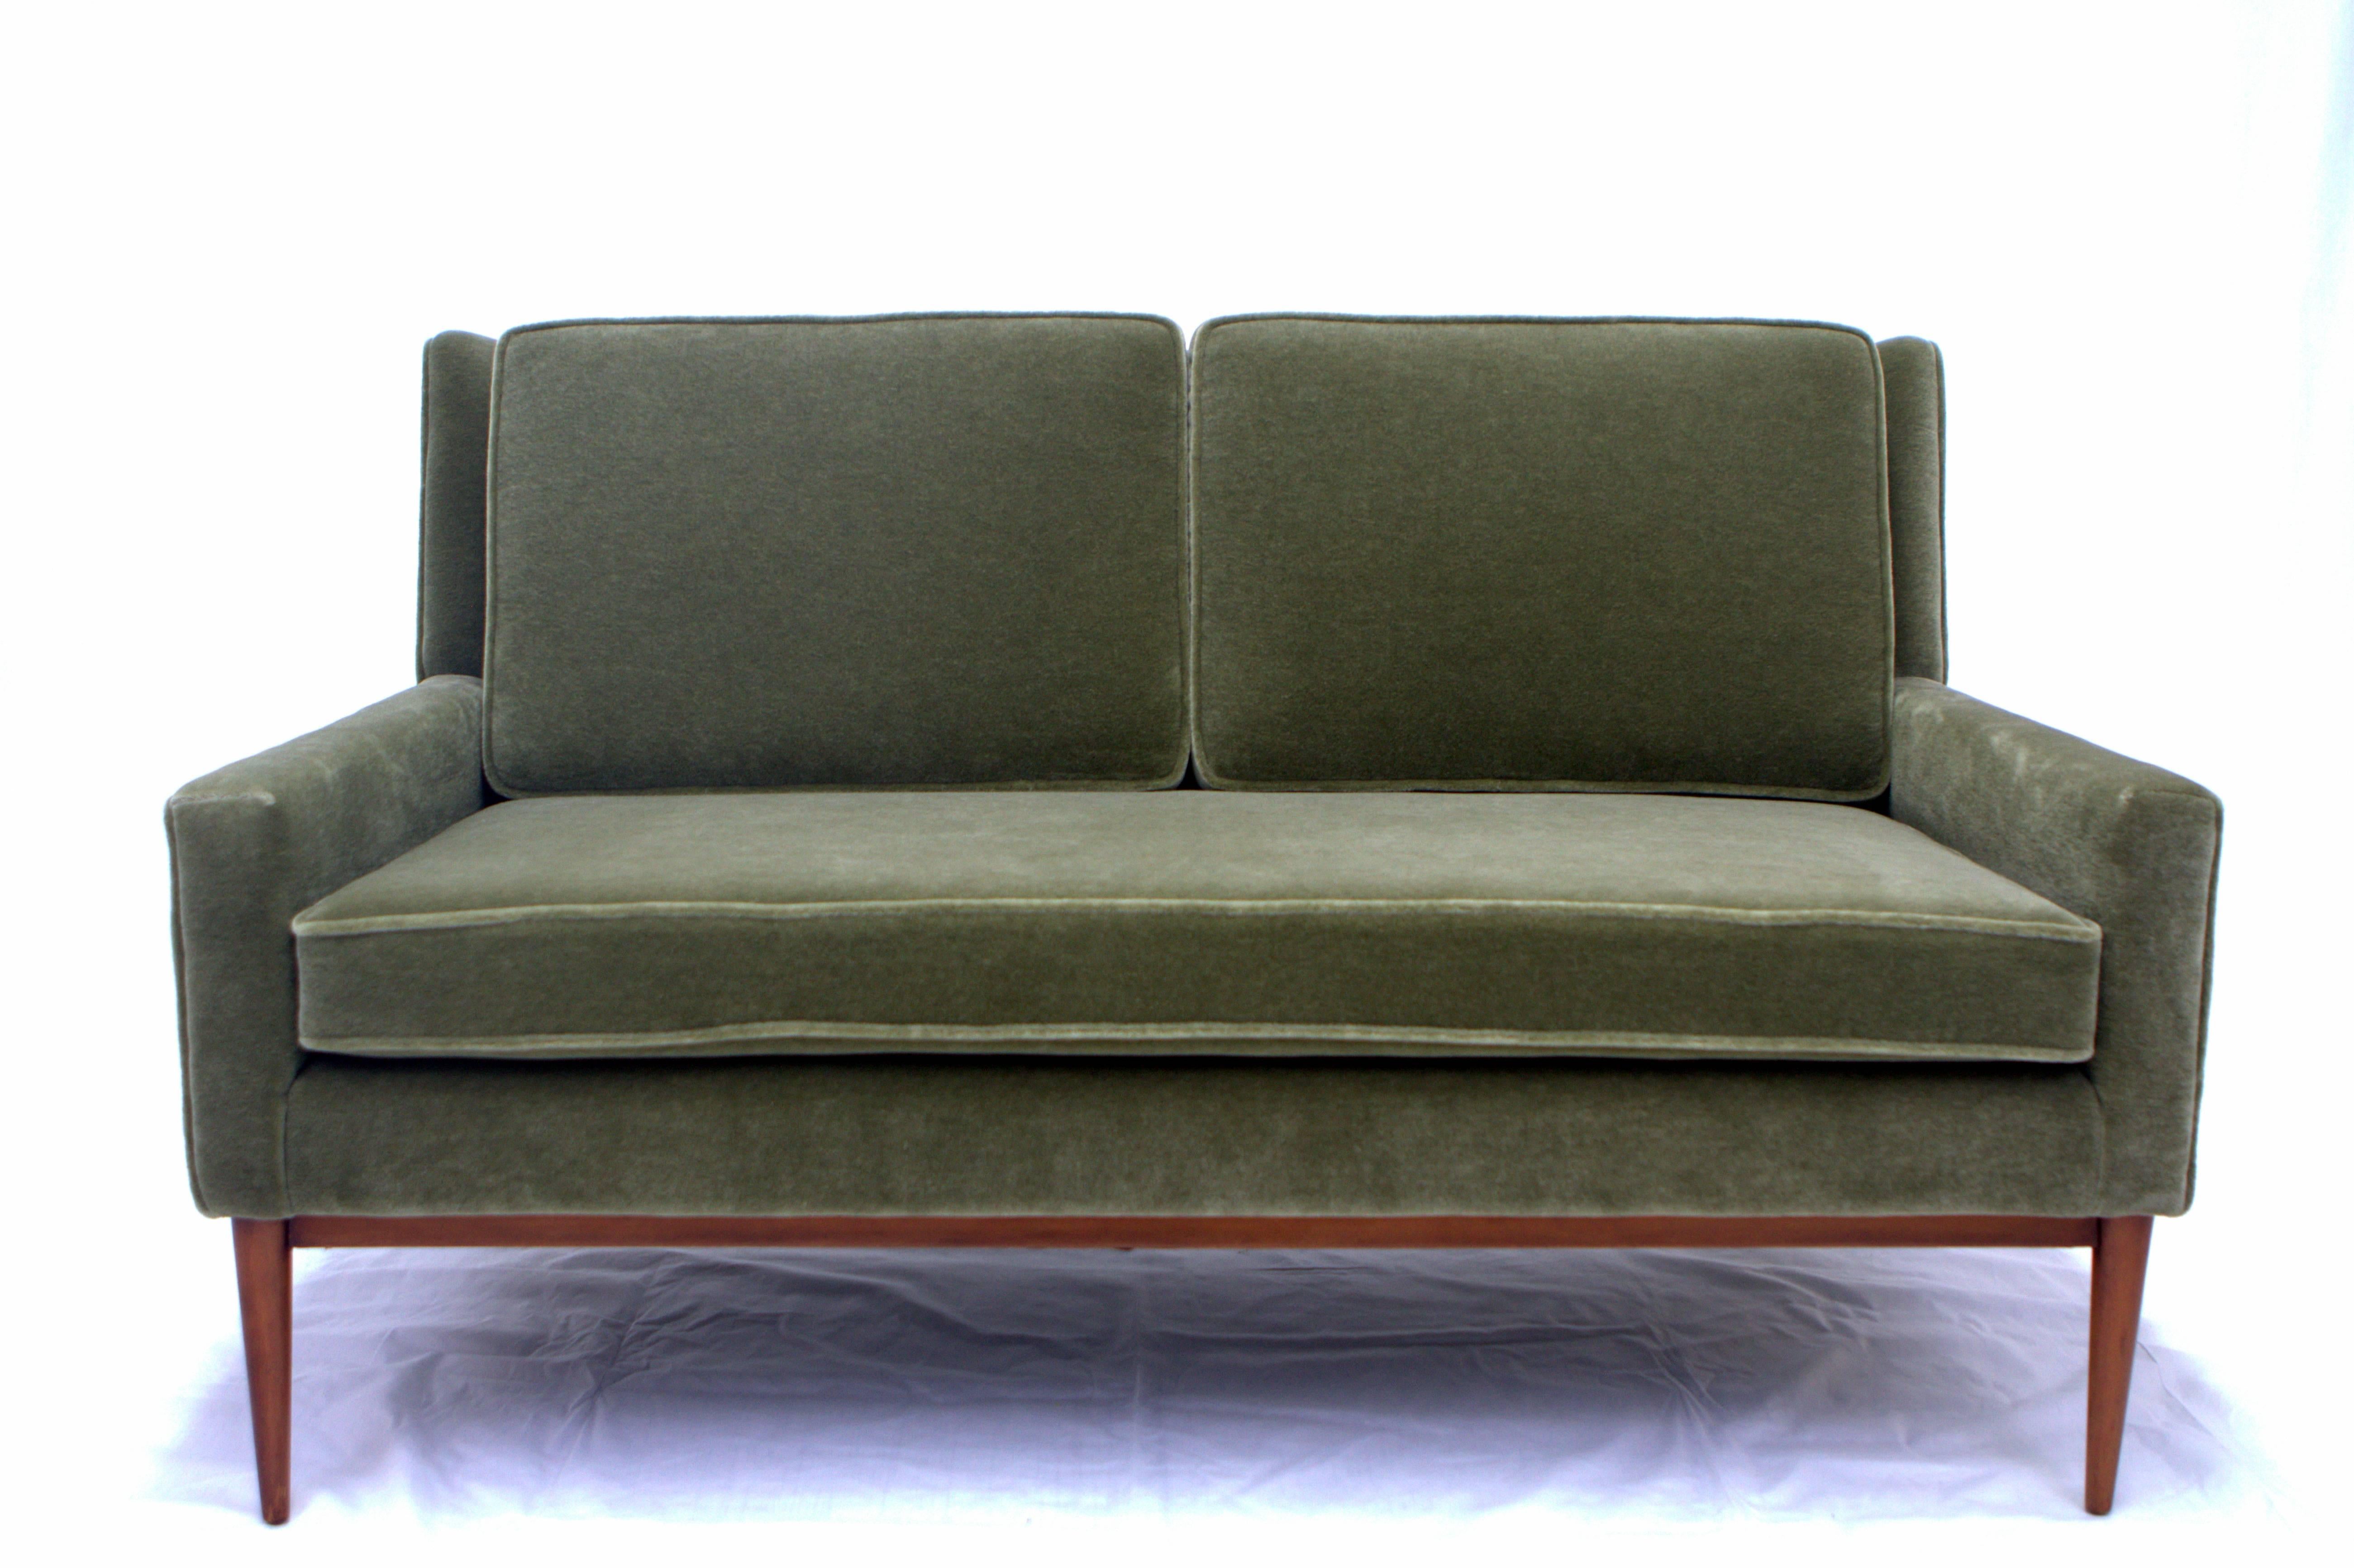 Paul McCobb loveseat for Directional reupholstered in olive/moss green mohair. Two back cushions resting on single seat cushion gives piece an elegant and refined proportion. Walnut frame refinished in medium walnut tone. Thick, plush mohair in a